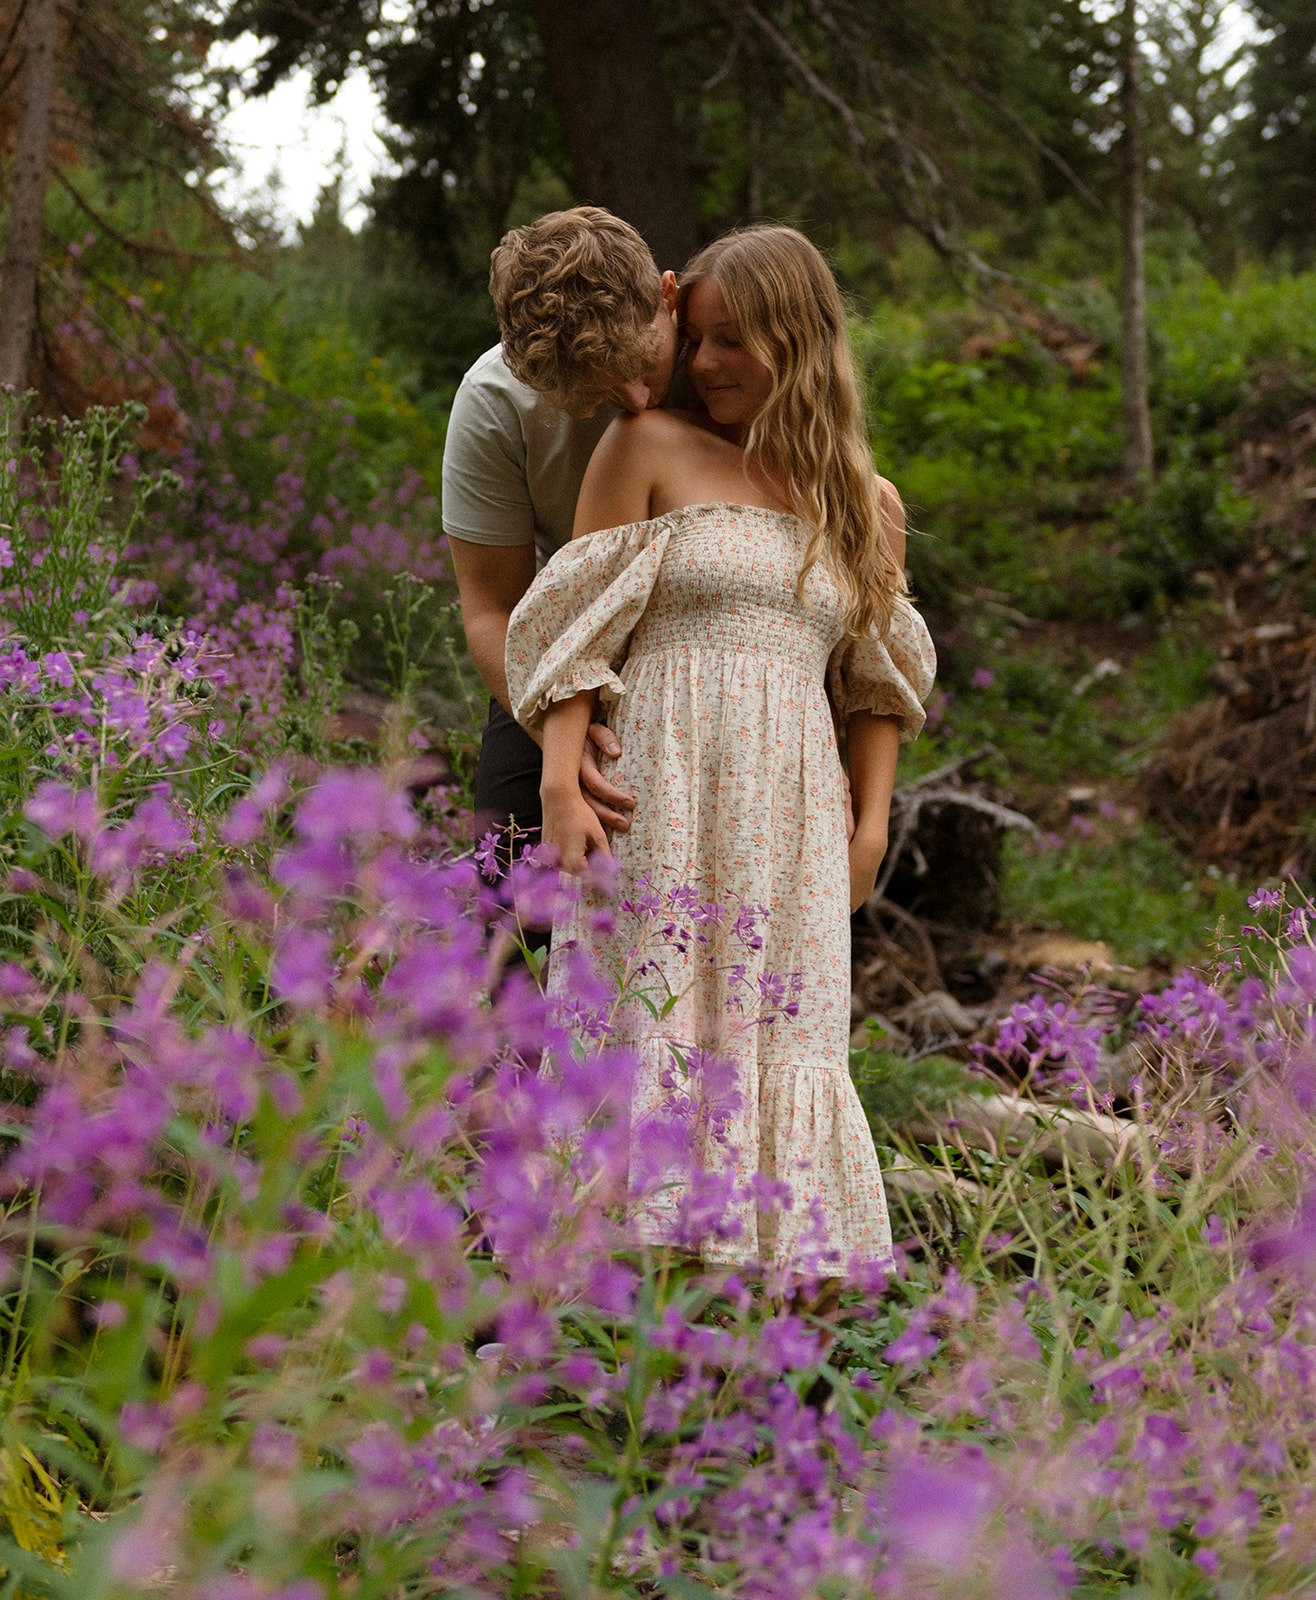 Magical and romantic evening in the Utah mountains, surrounded by purple flowers, lush greens and the pines